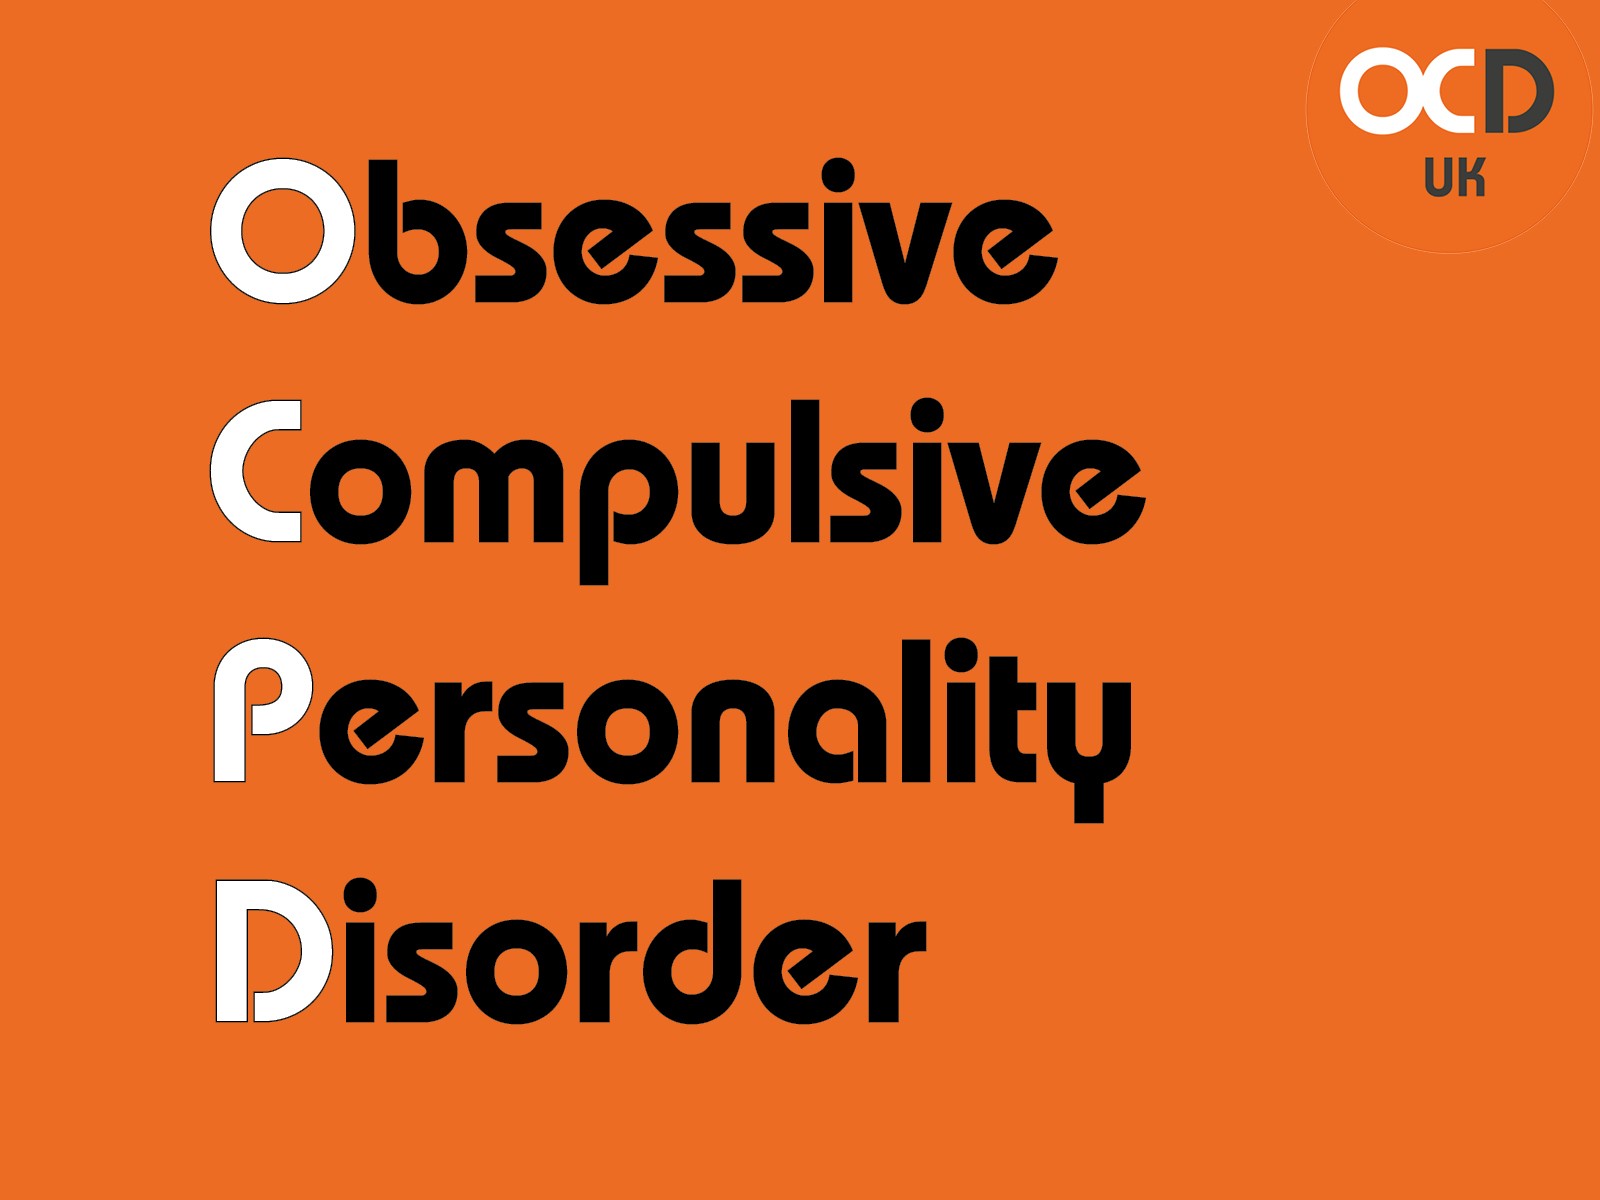 How to recognize obsessive compulsive personality disorder